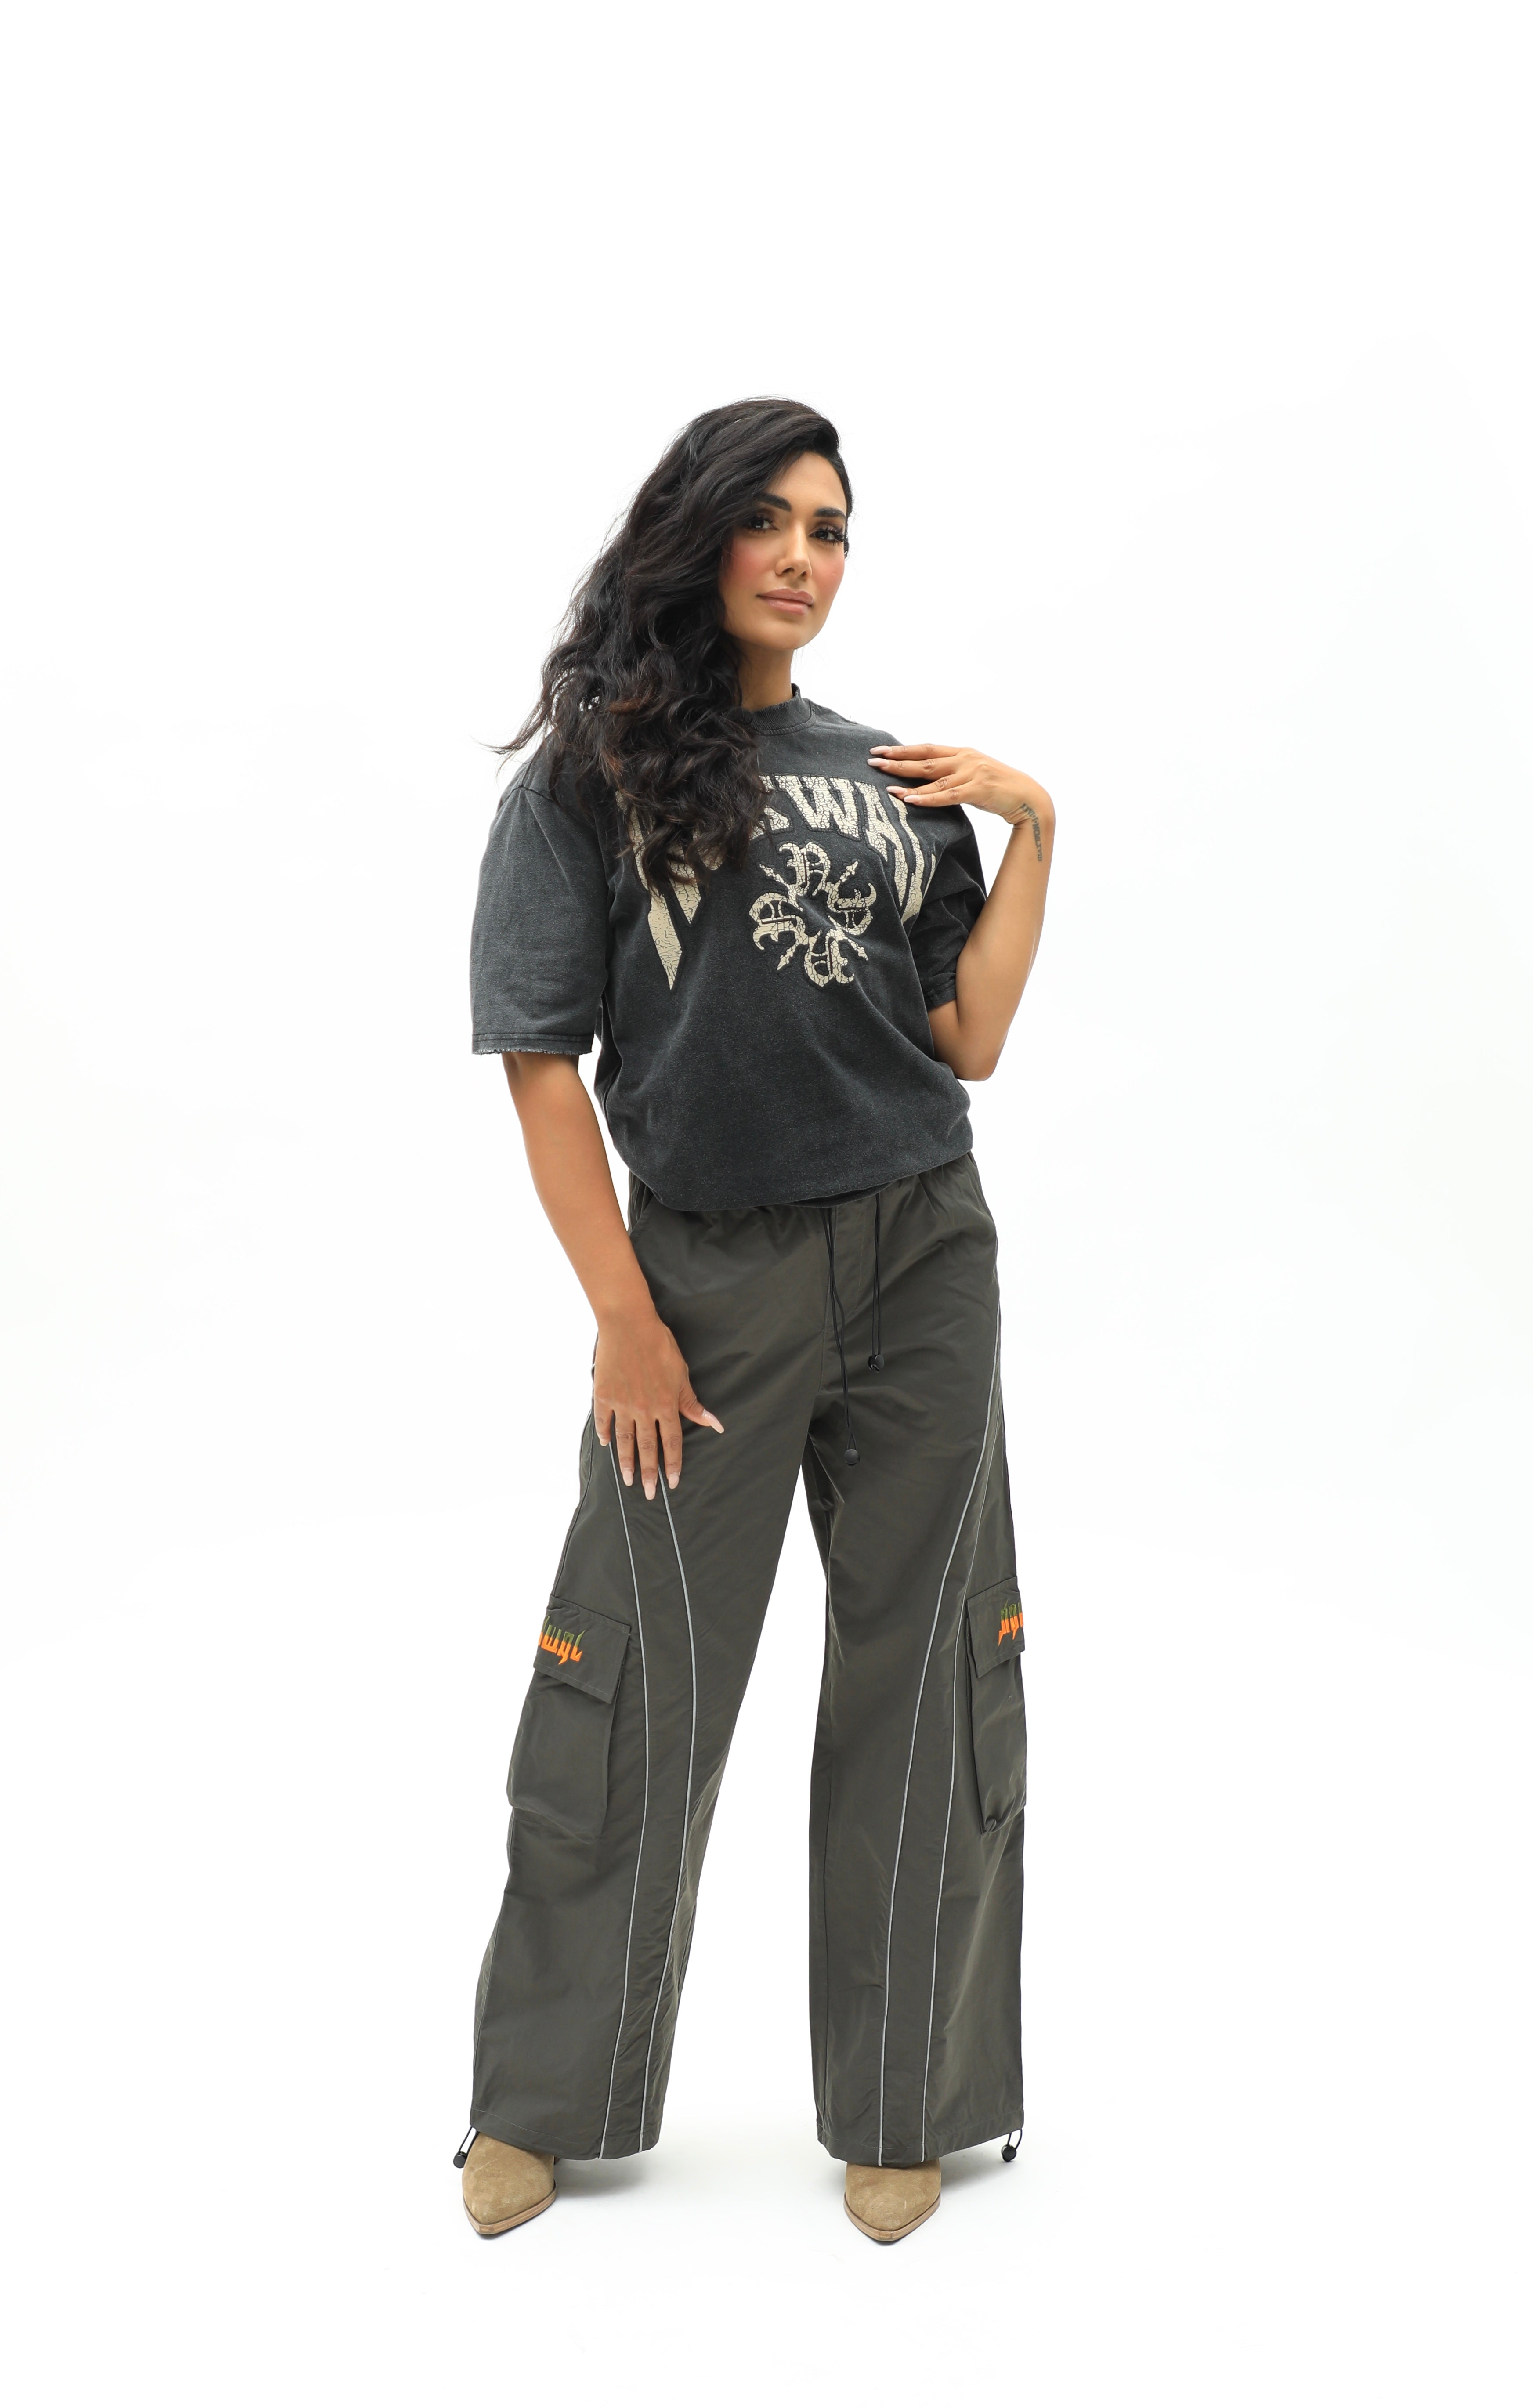 Unisex Baggy Cargo Sports Track Pants